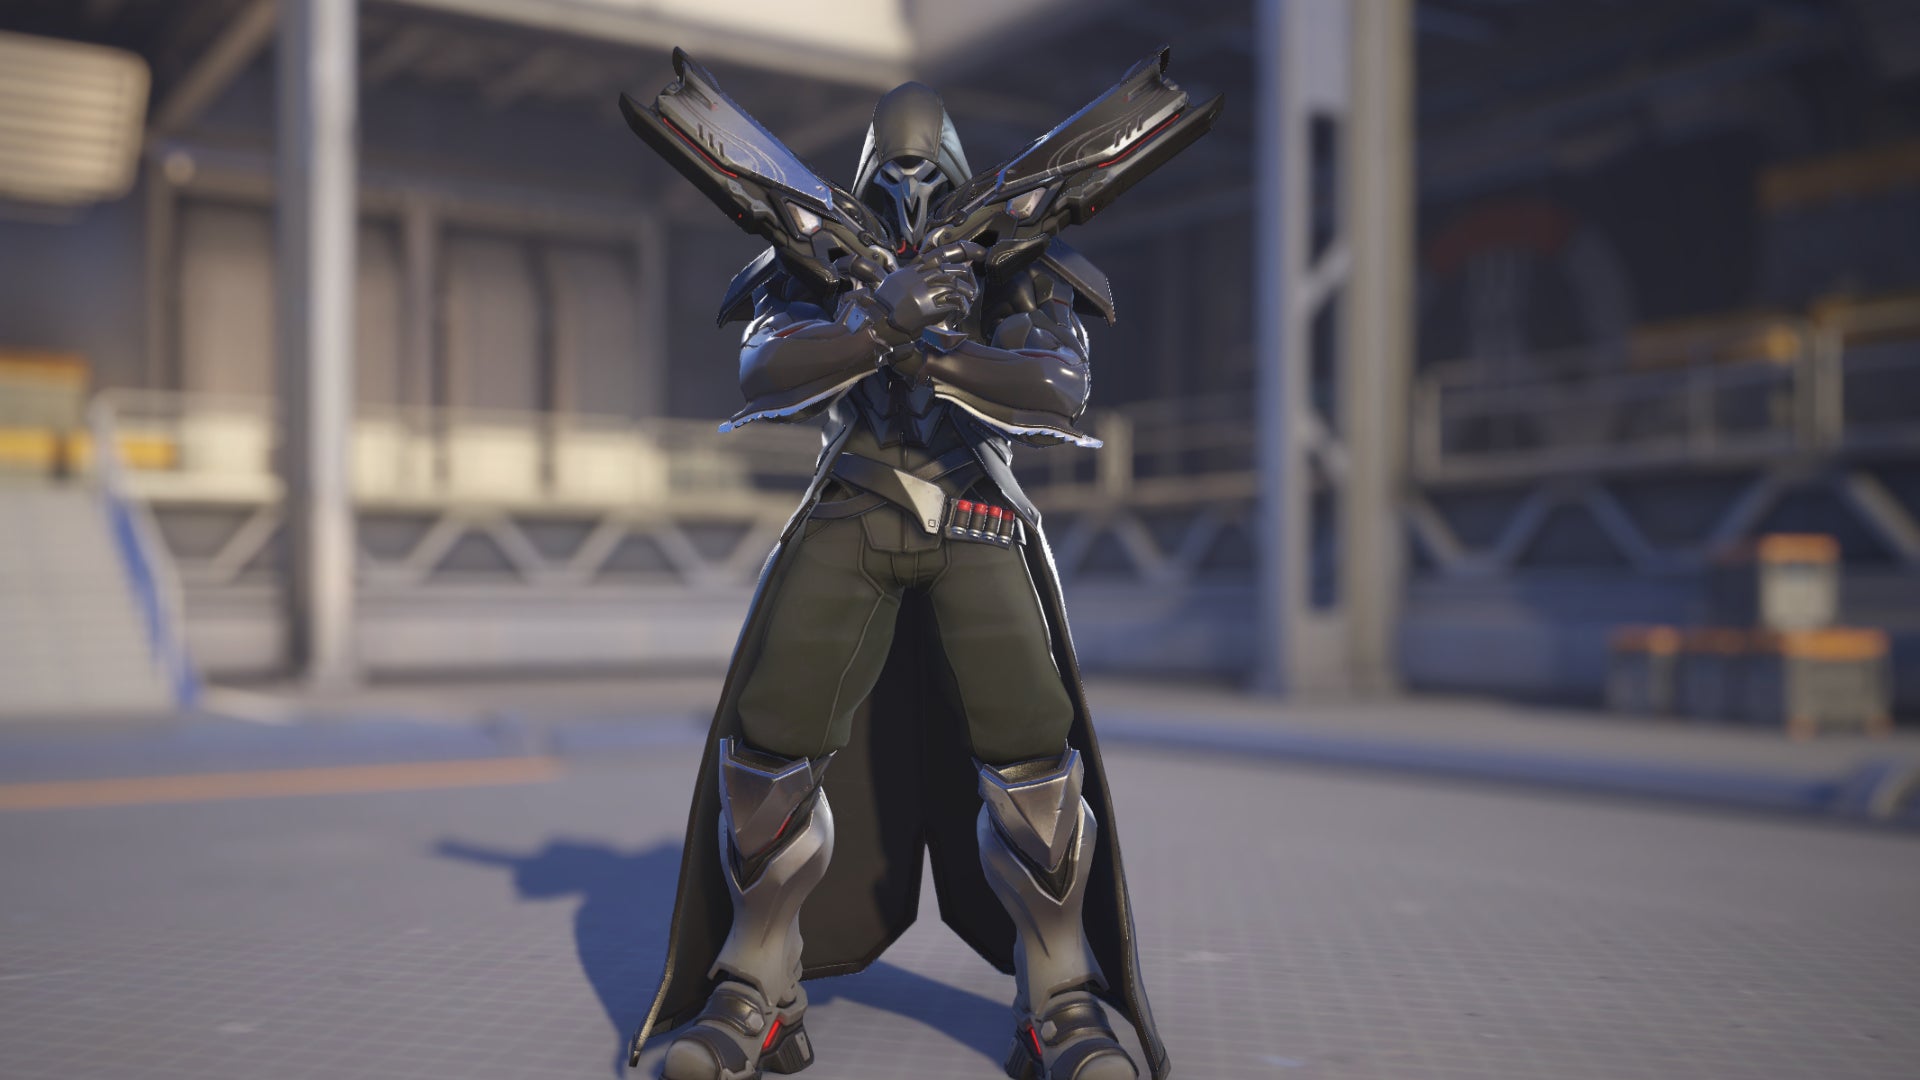 Reaper, a hero in Overwatch 2, poses before the camera in the hero selection screen.